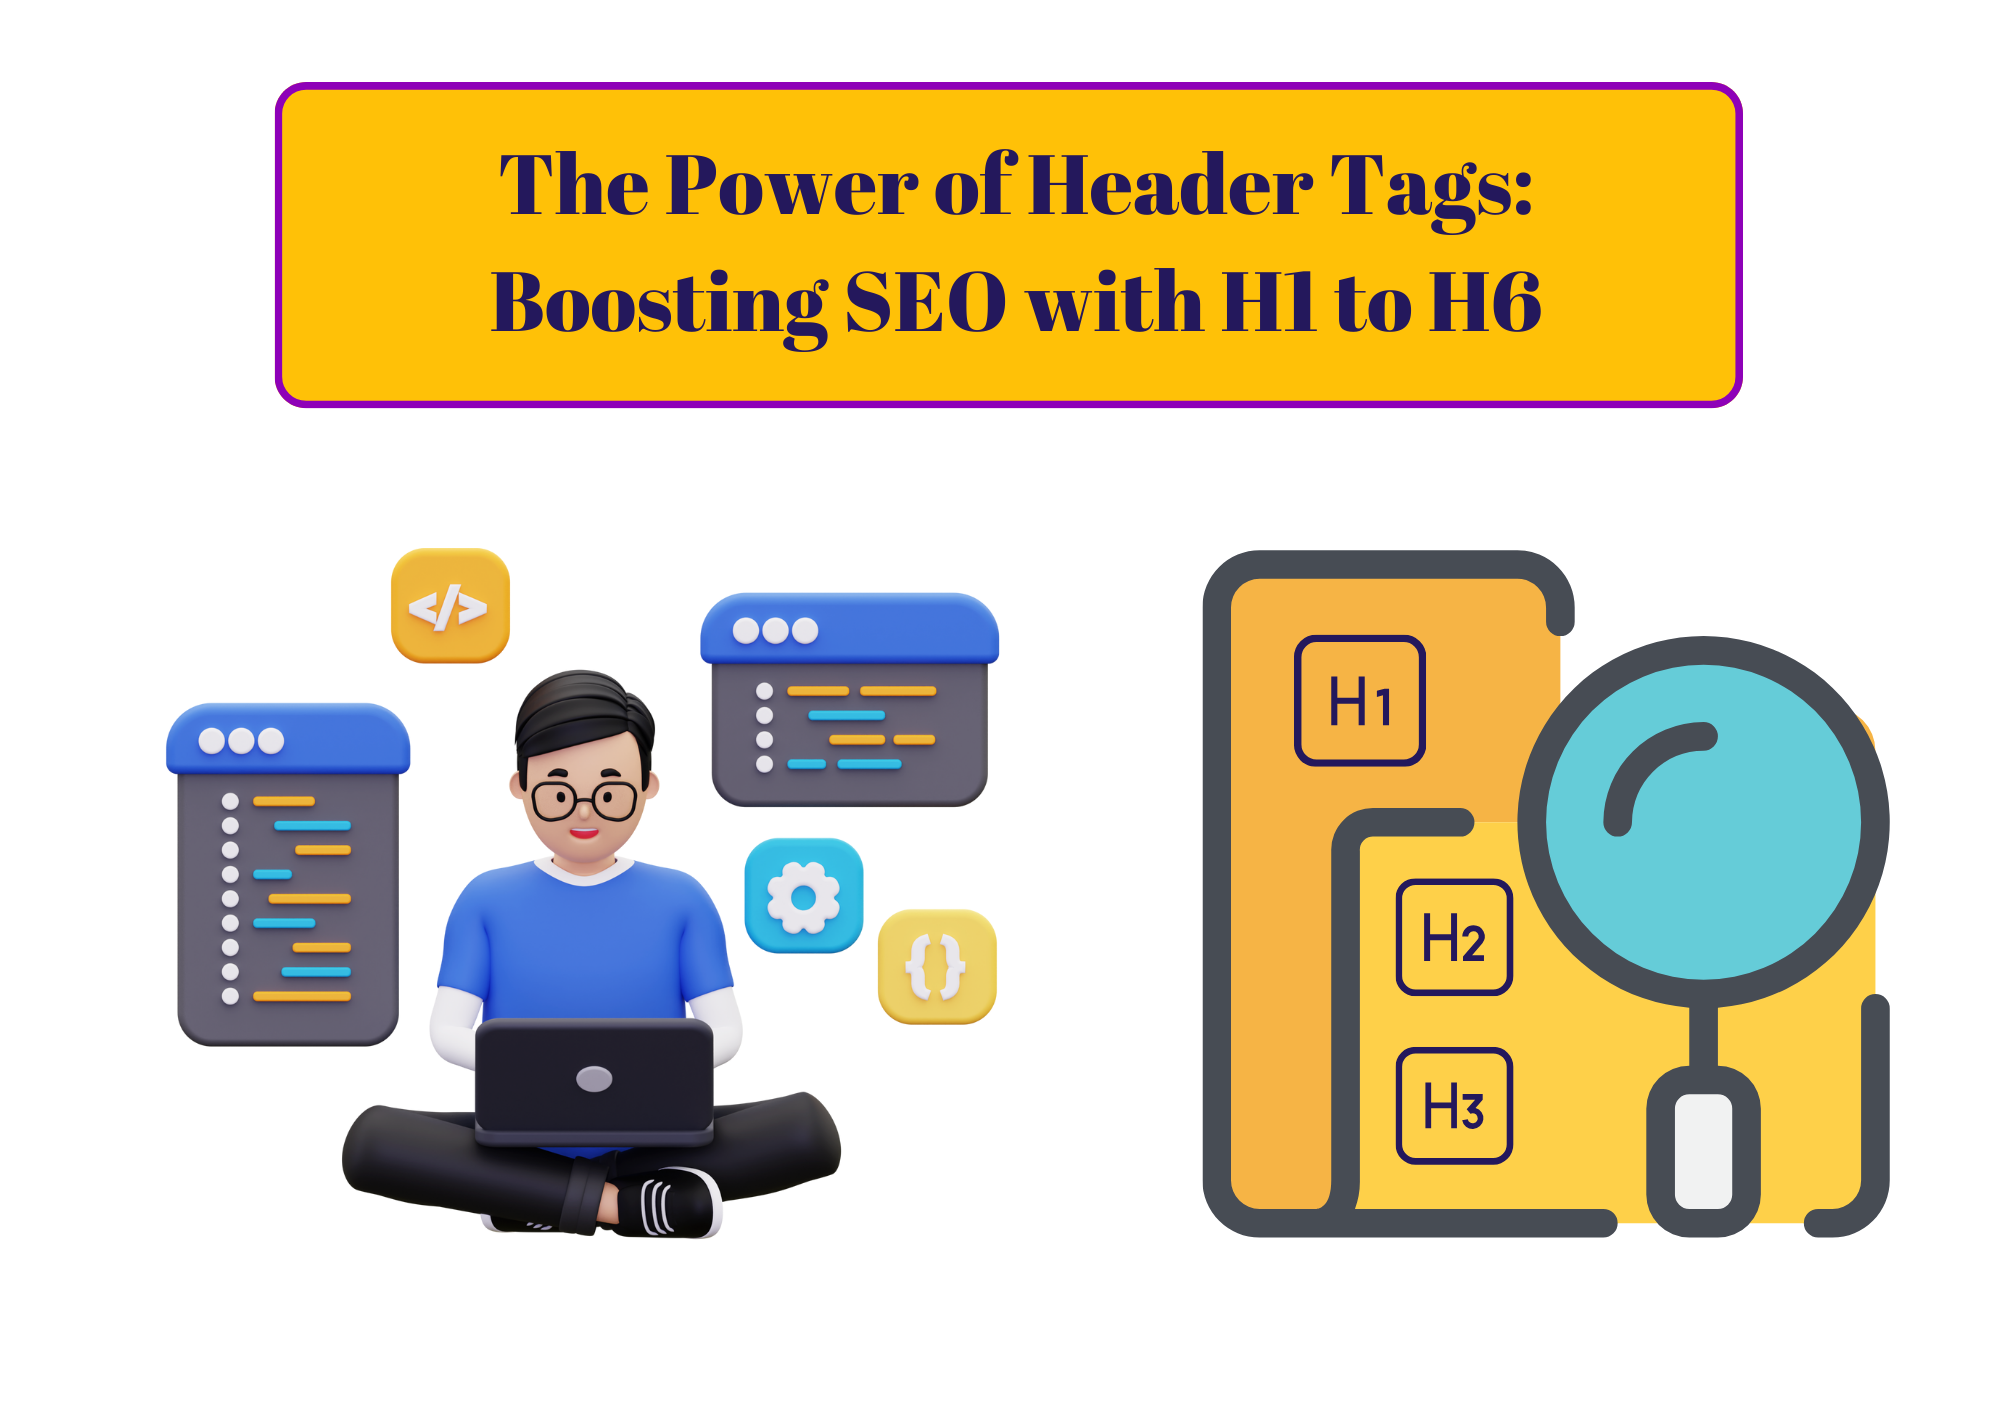 The Power of Header Tags Boosting SEO with H1 to H6